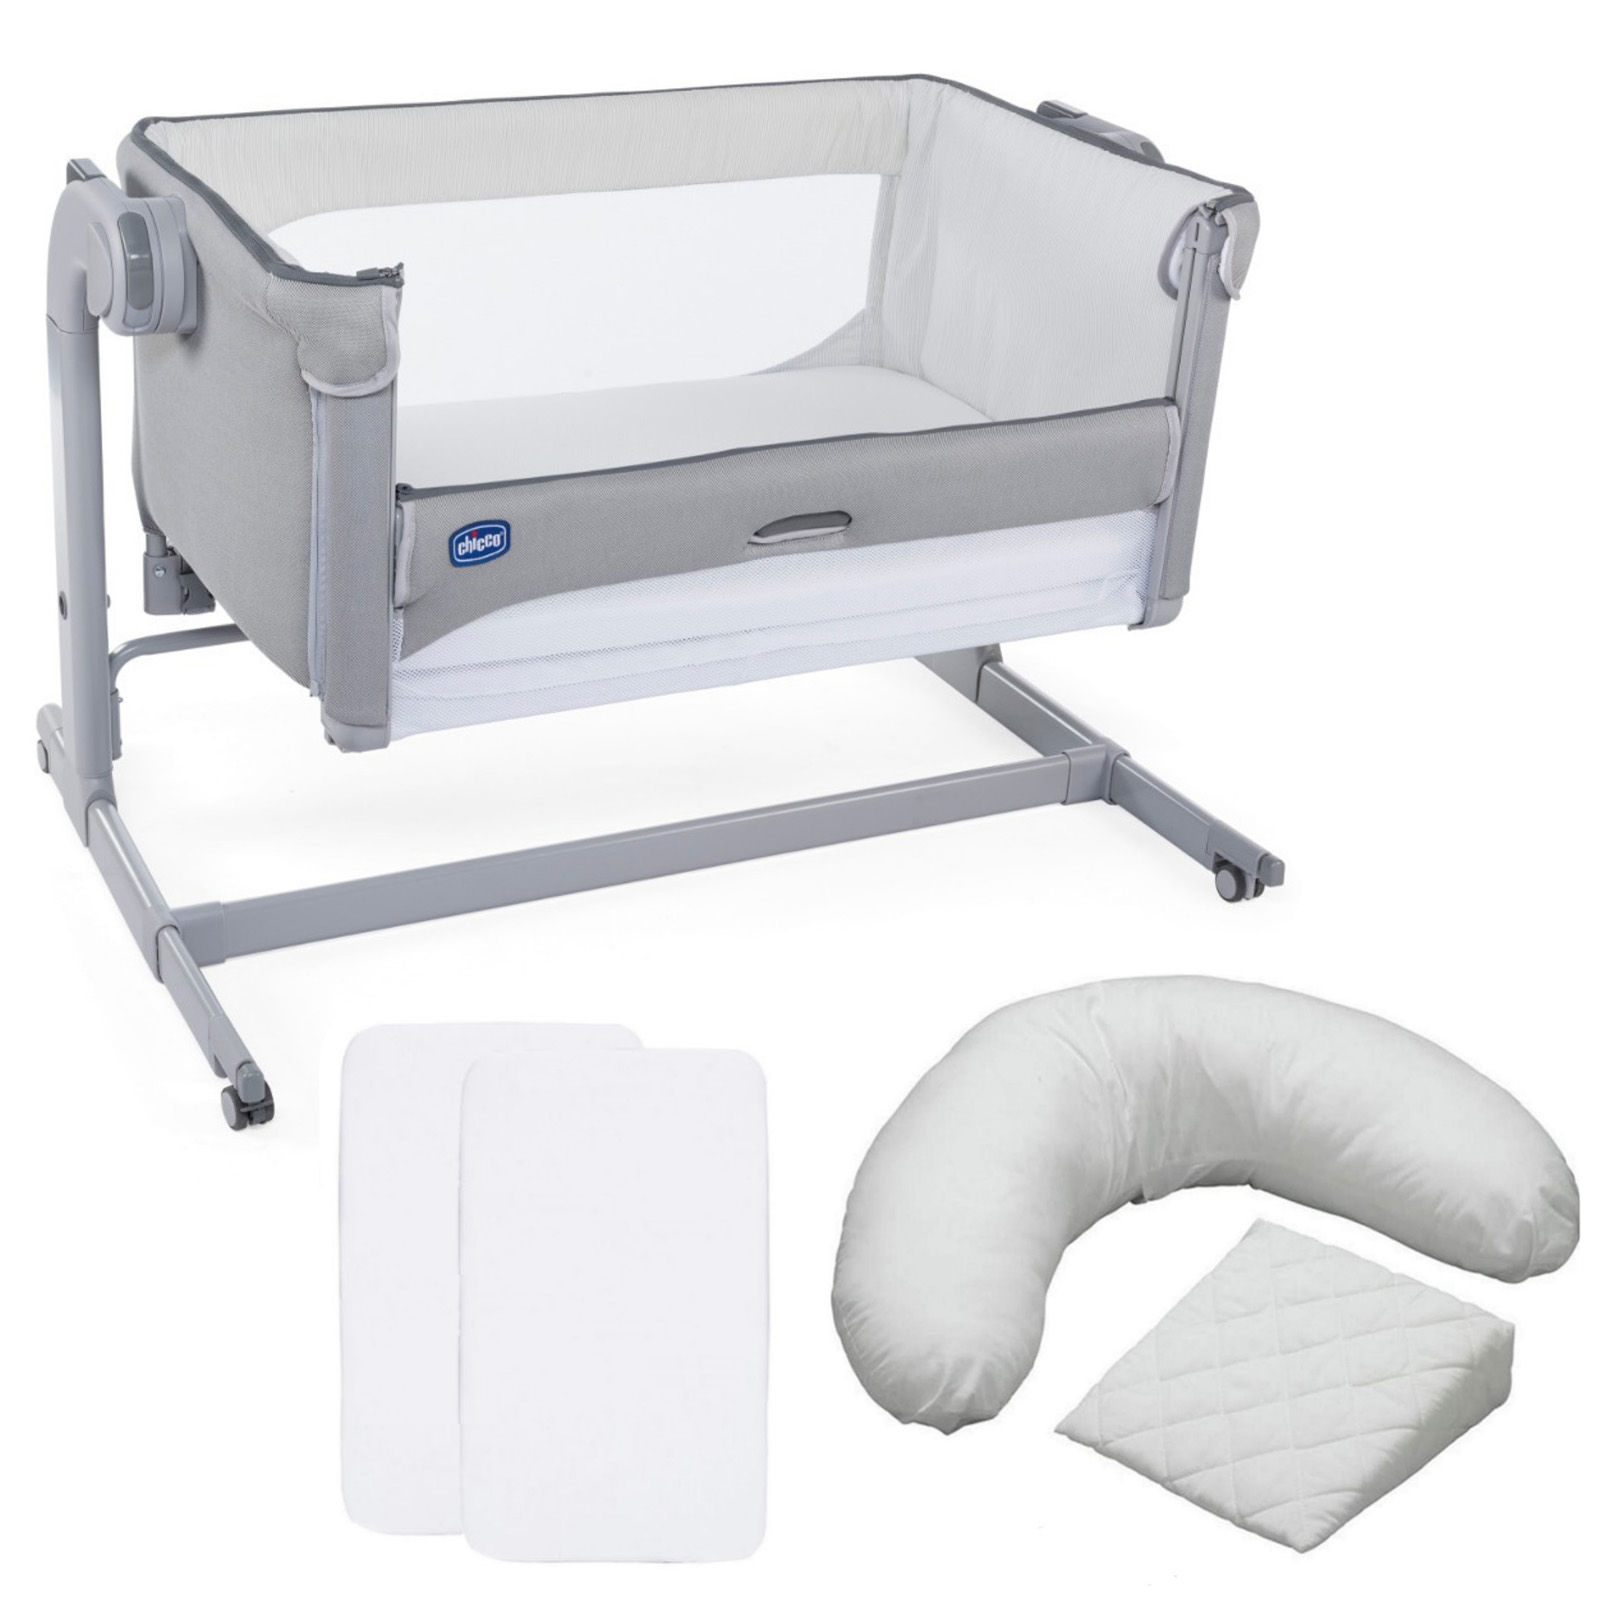 amazon pack and play bassinet